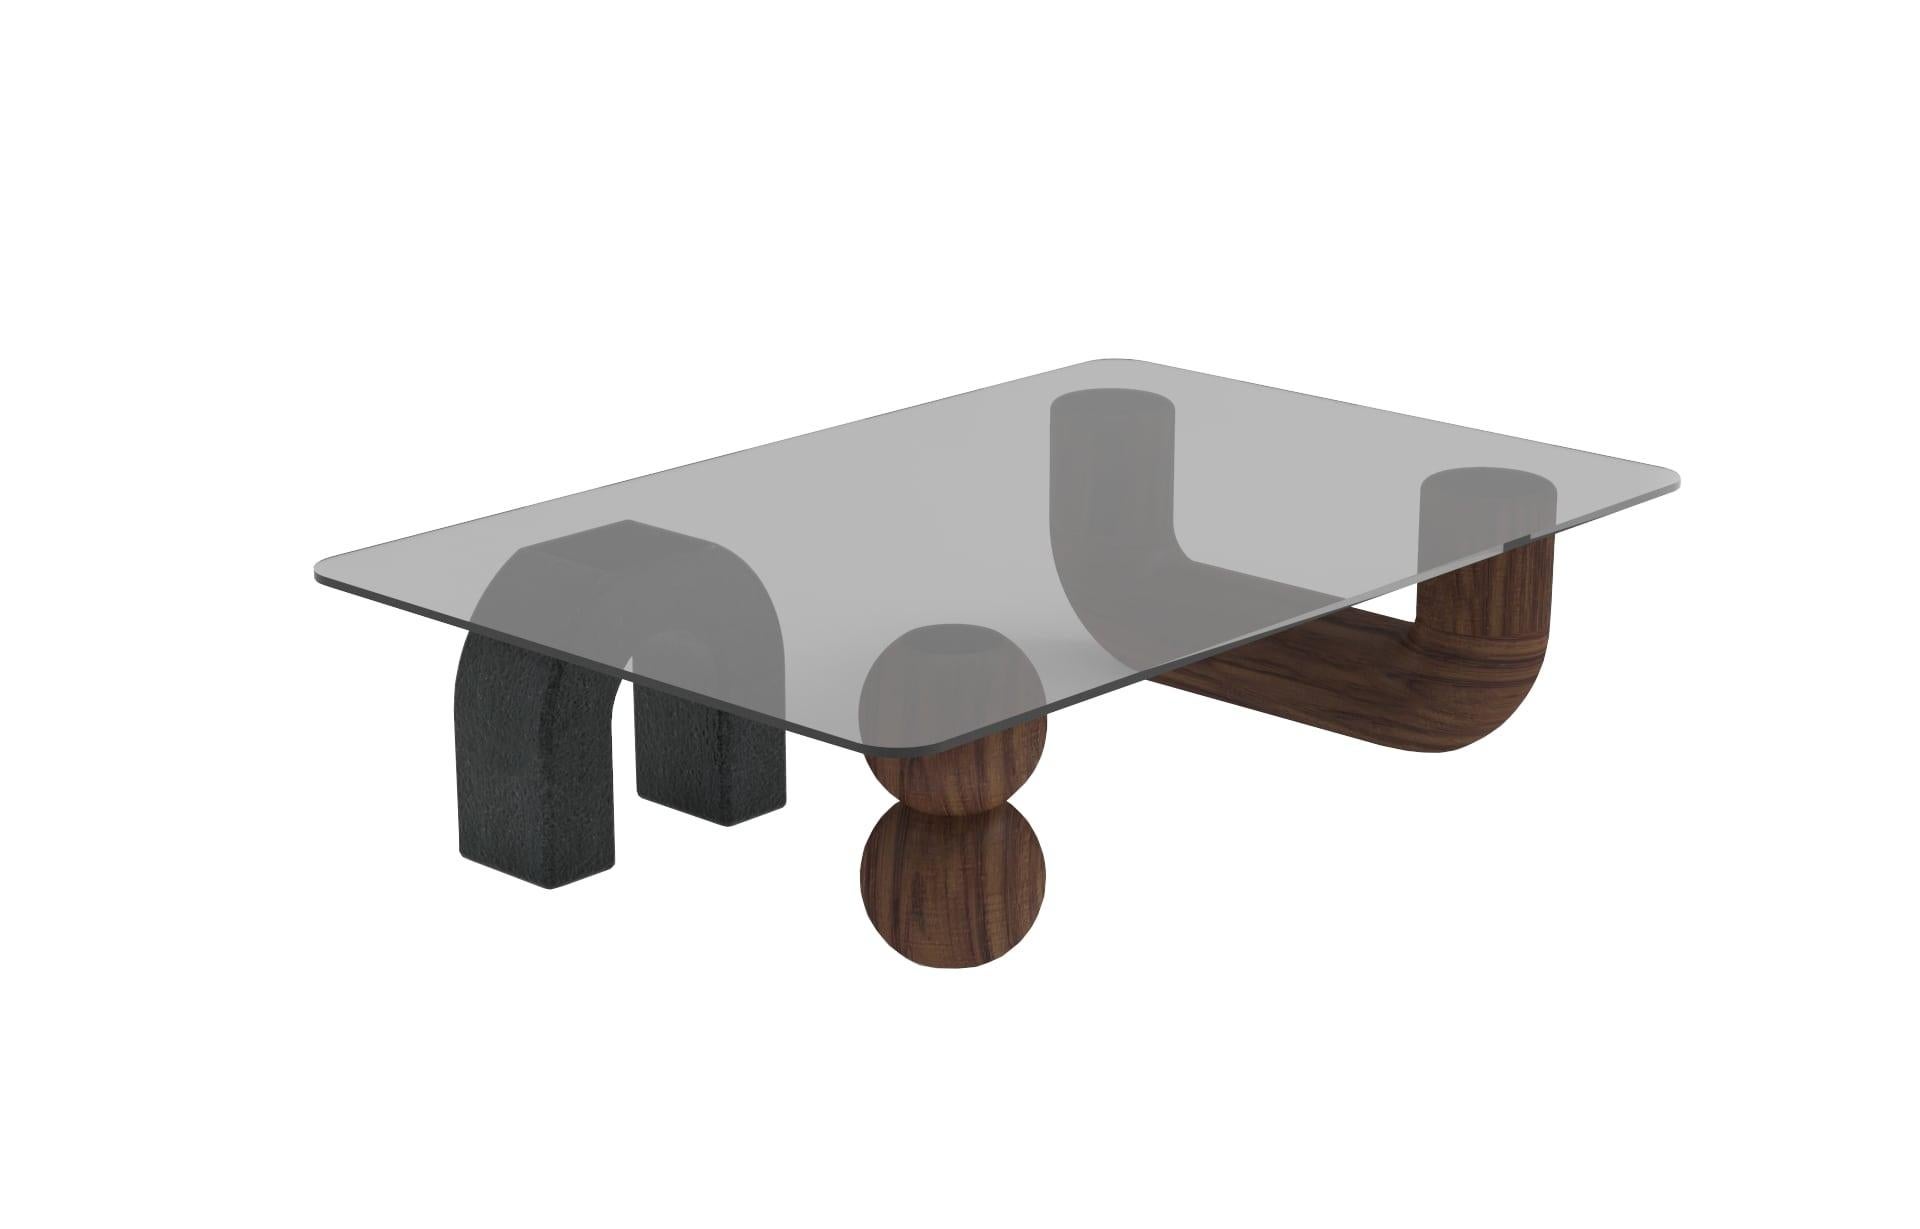 Rosedal coffee table by Comité de Proyectos
Dimensions: 120 x 80 x 30 cm
Materials: Solid Huanacaxtle wood, Volcanic stone, Ray smoked glass

This table was made in collaboration with the Ángulo Cero gallery.
The Rosedal table is a sculptural